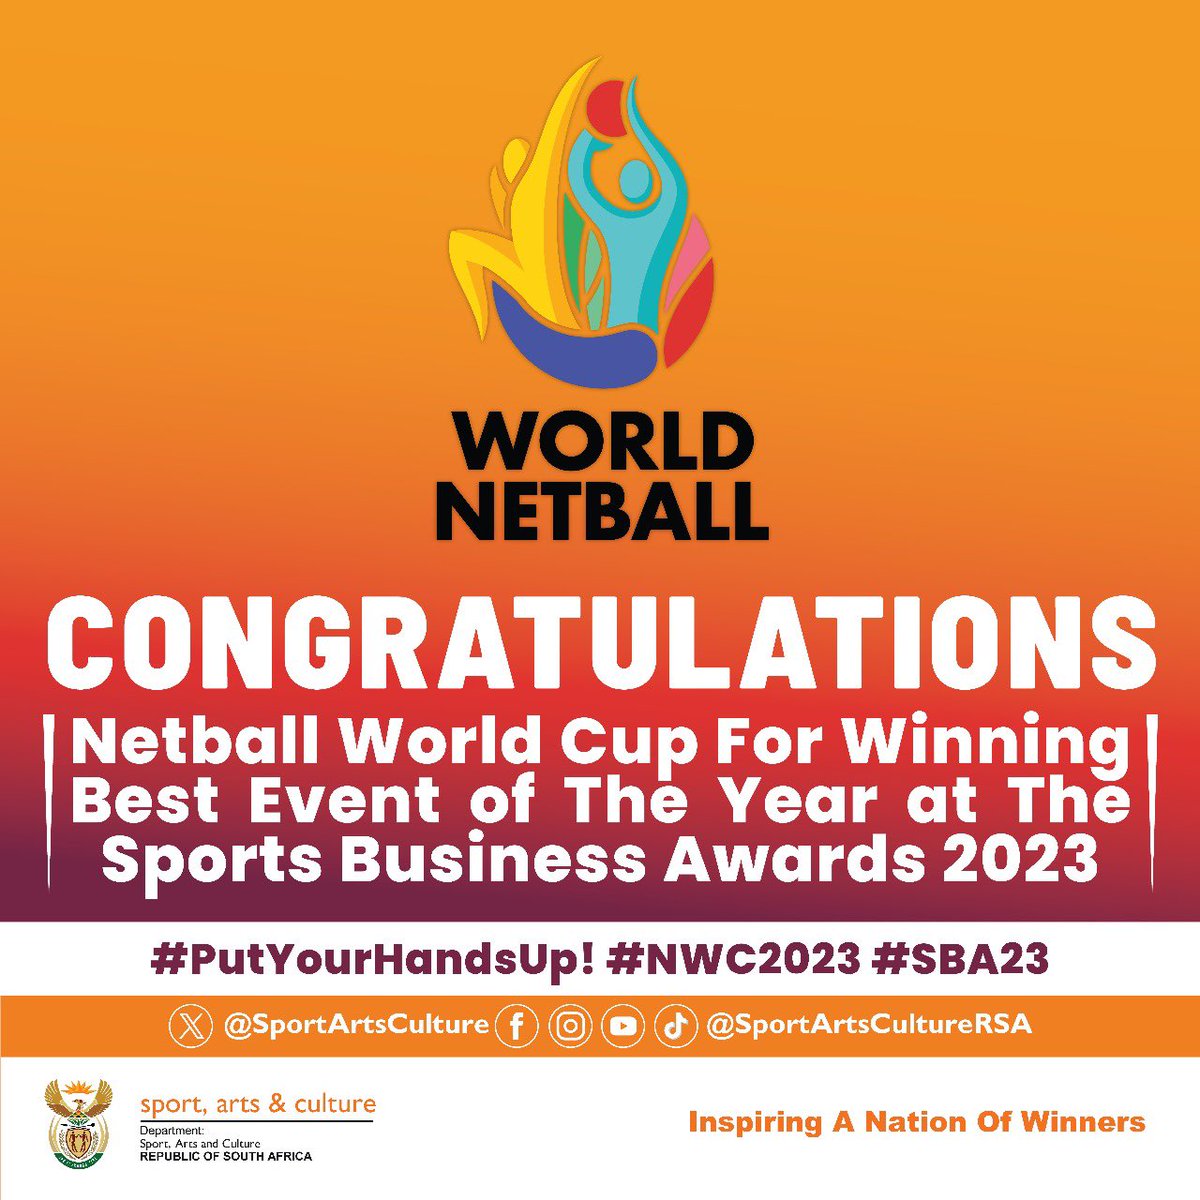 Congratulations to the Netball World Cup as the best event of the year in 2023 at the Sports Business Awards.

The event had positive feedback, attendance from South Africans & fans around the world, great engagement & magnificent brand awareness.

#NWC23 #PutYourHandsUp #SBA23